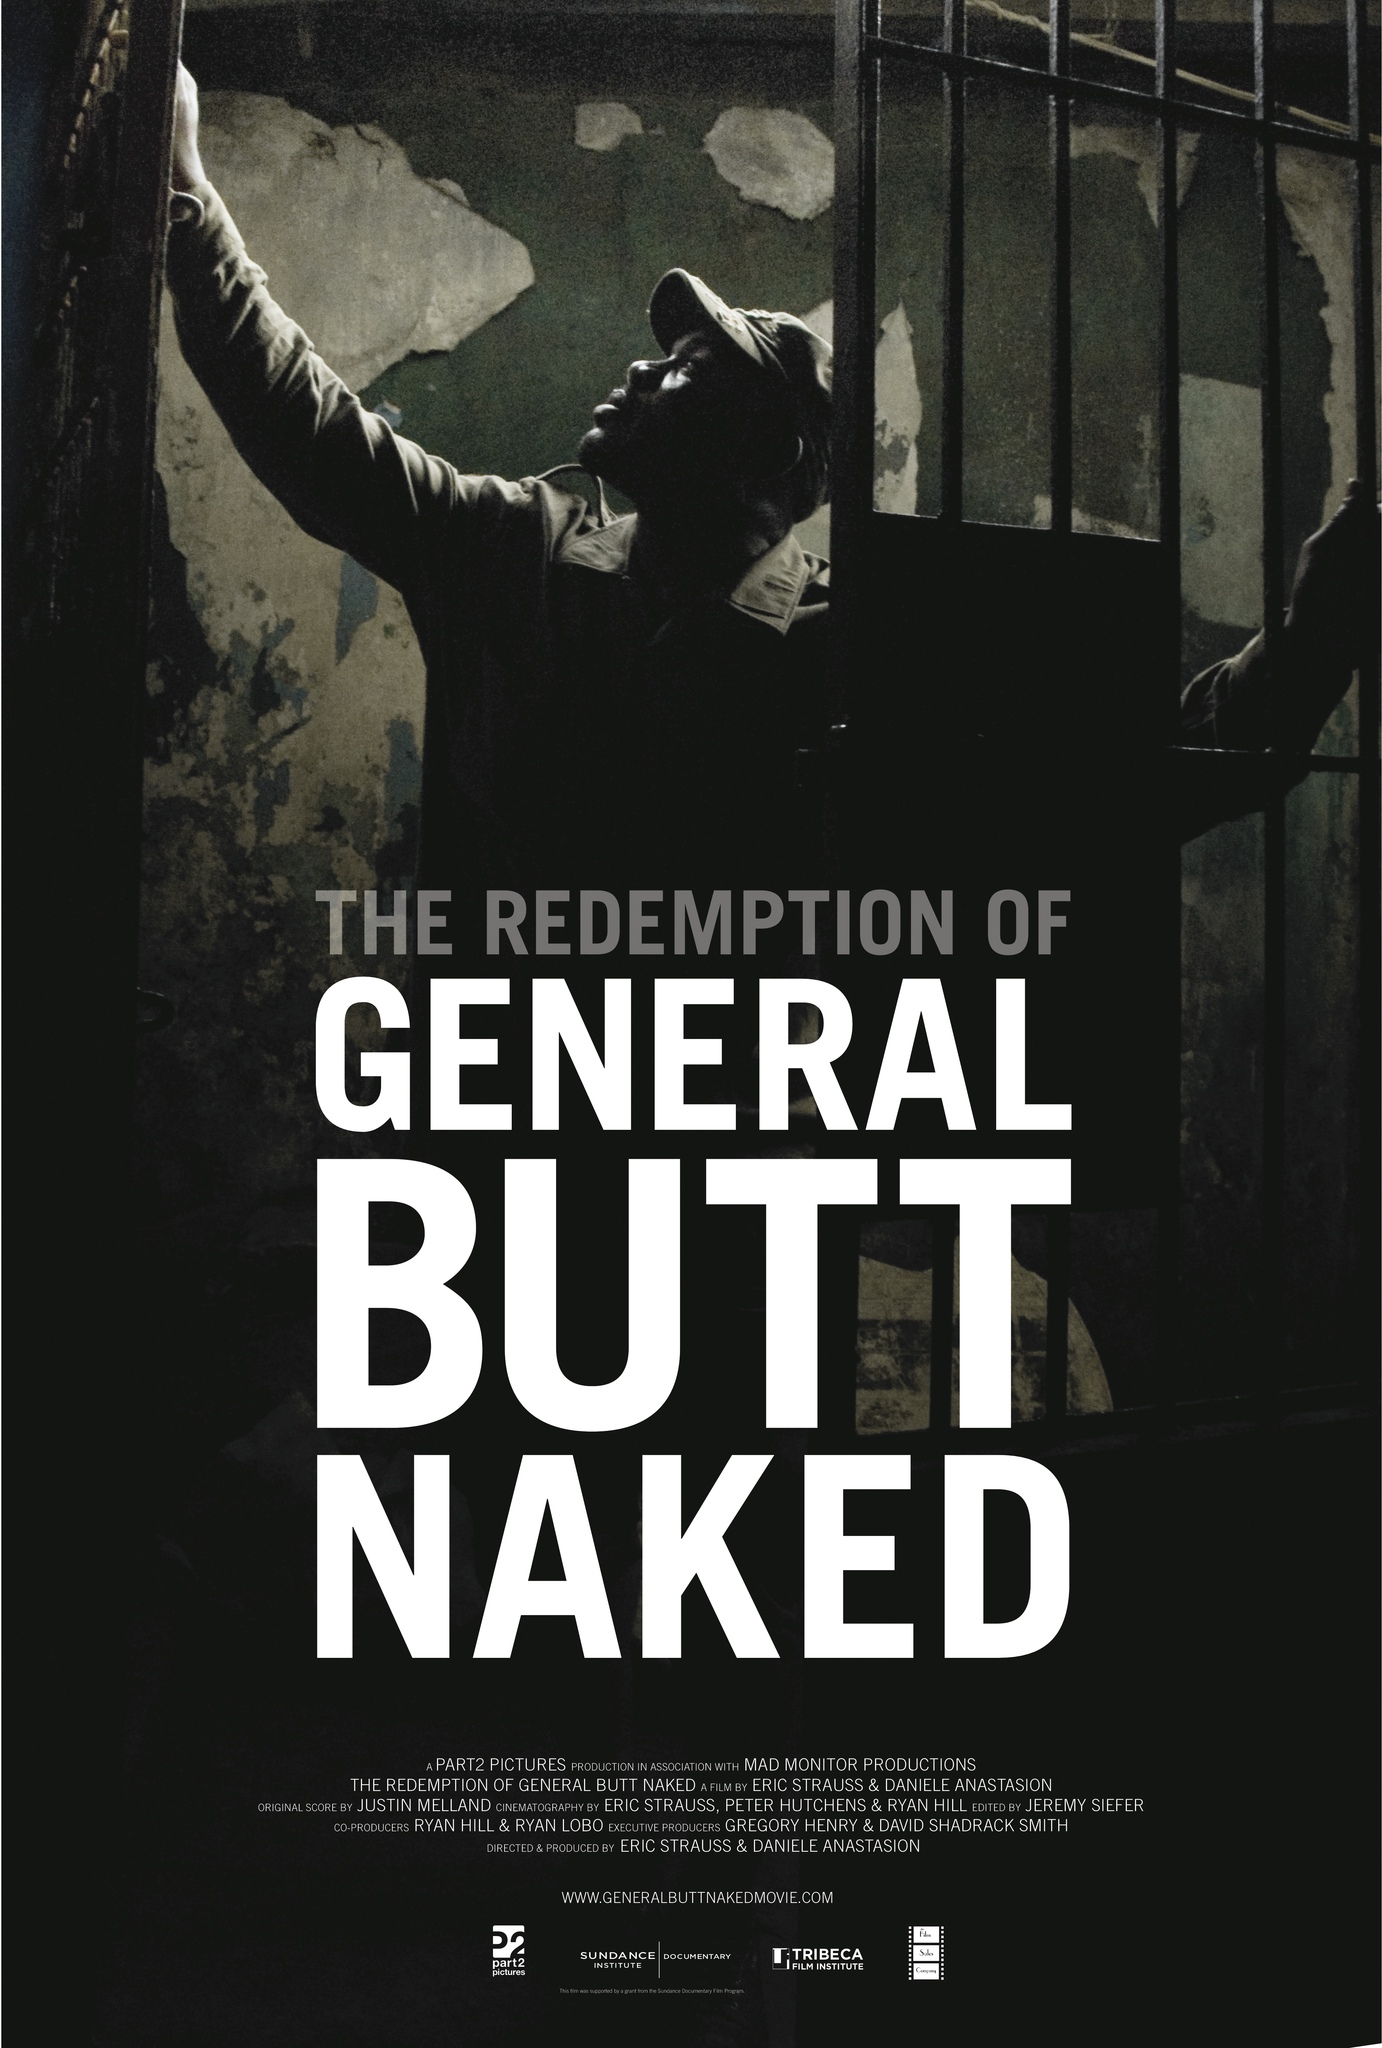 The Redemption of General Butt Naked (2011) Screenshot 4 